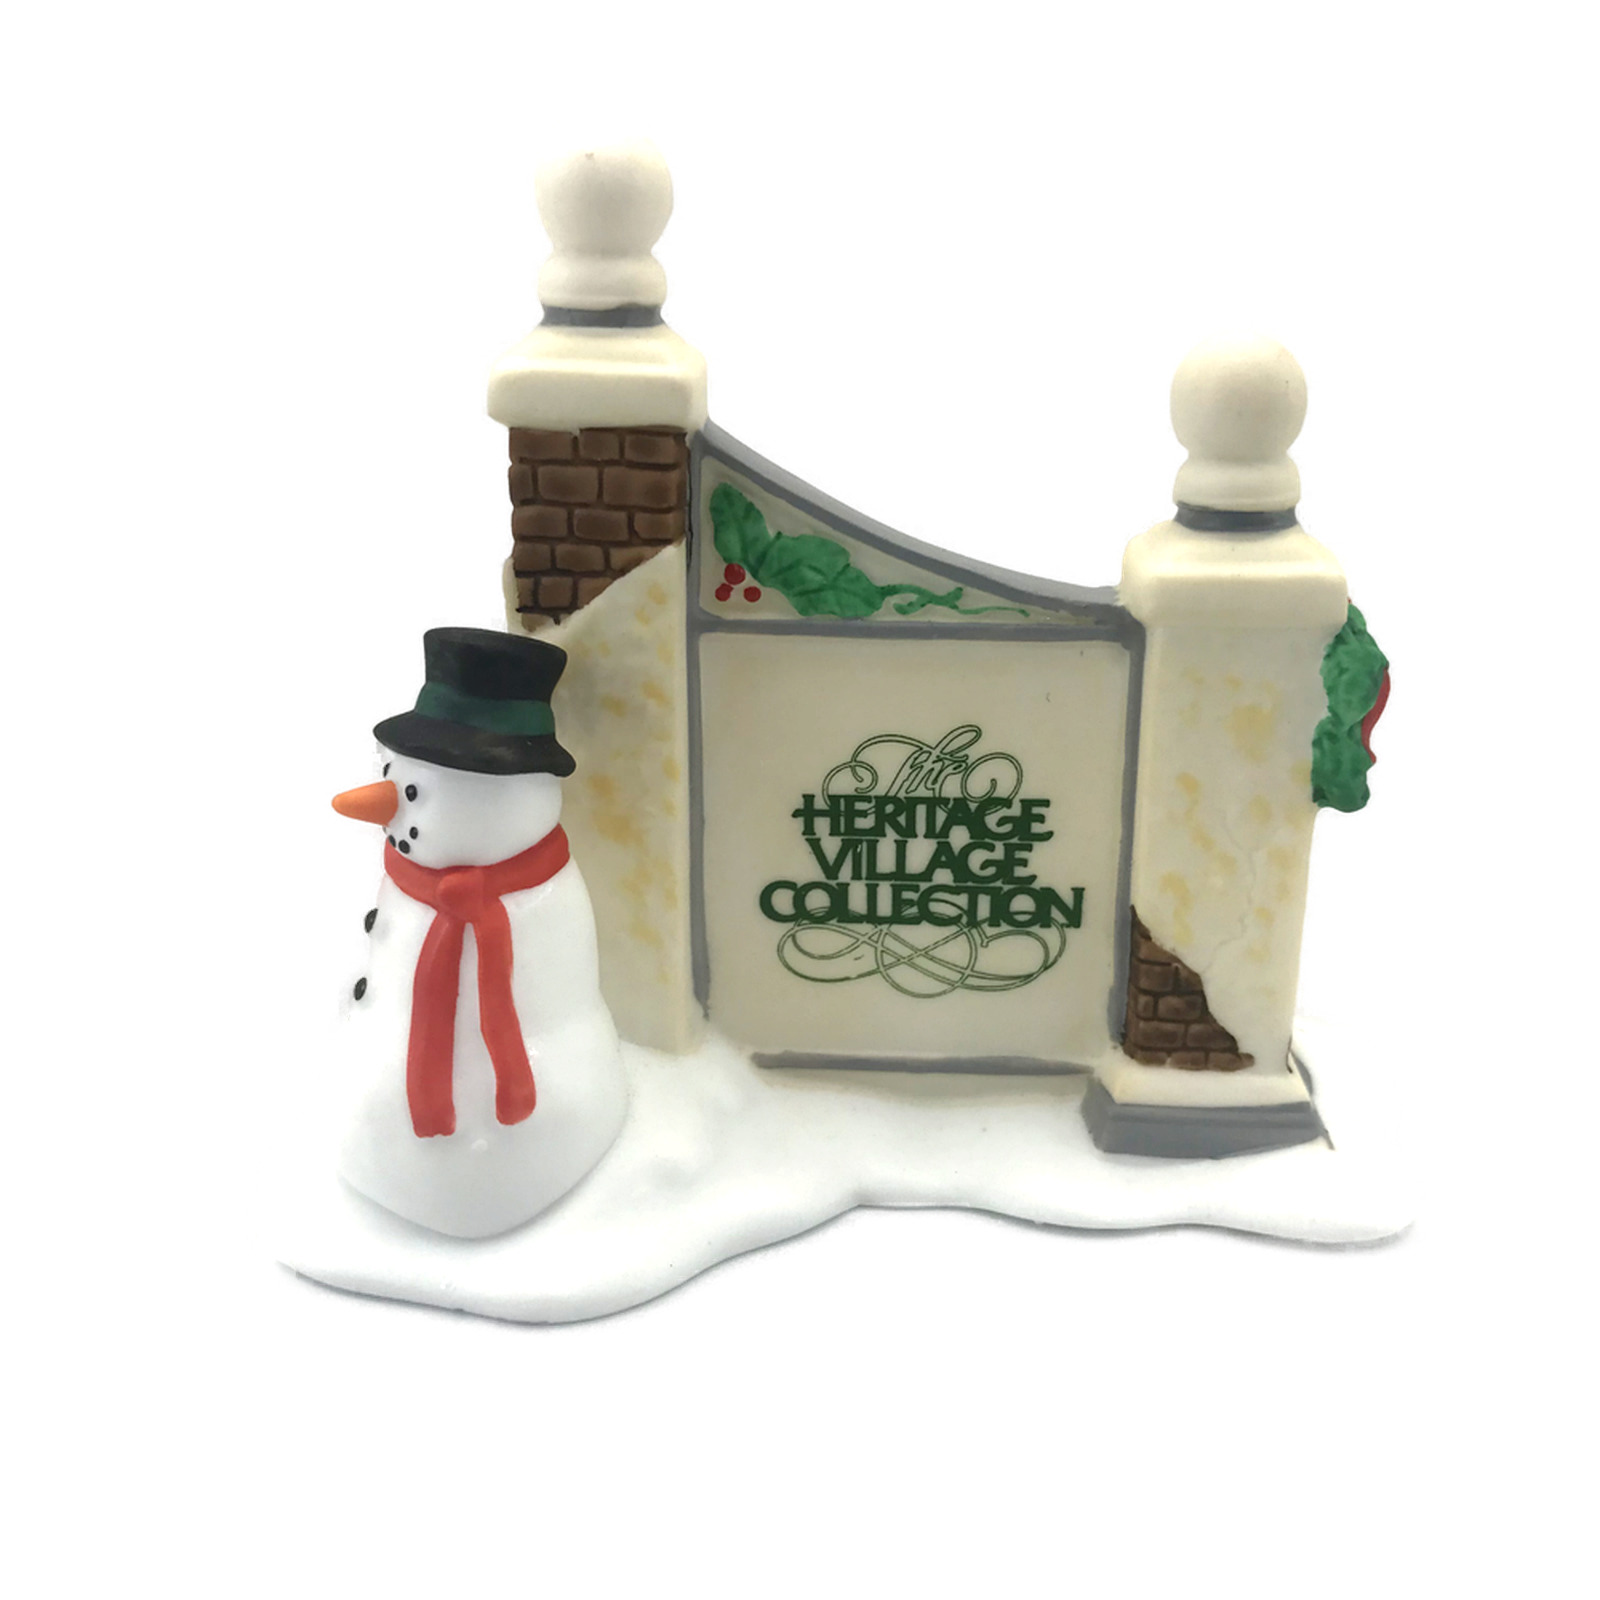 Dept 56 Heritage Village Collection Sign w/ Snowman Accessory 5572-7